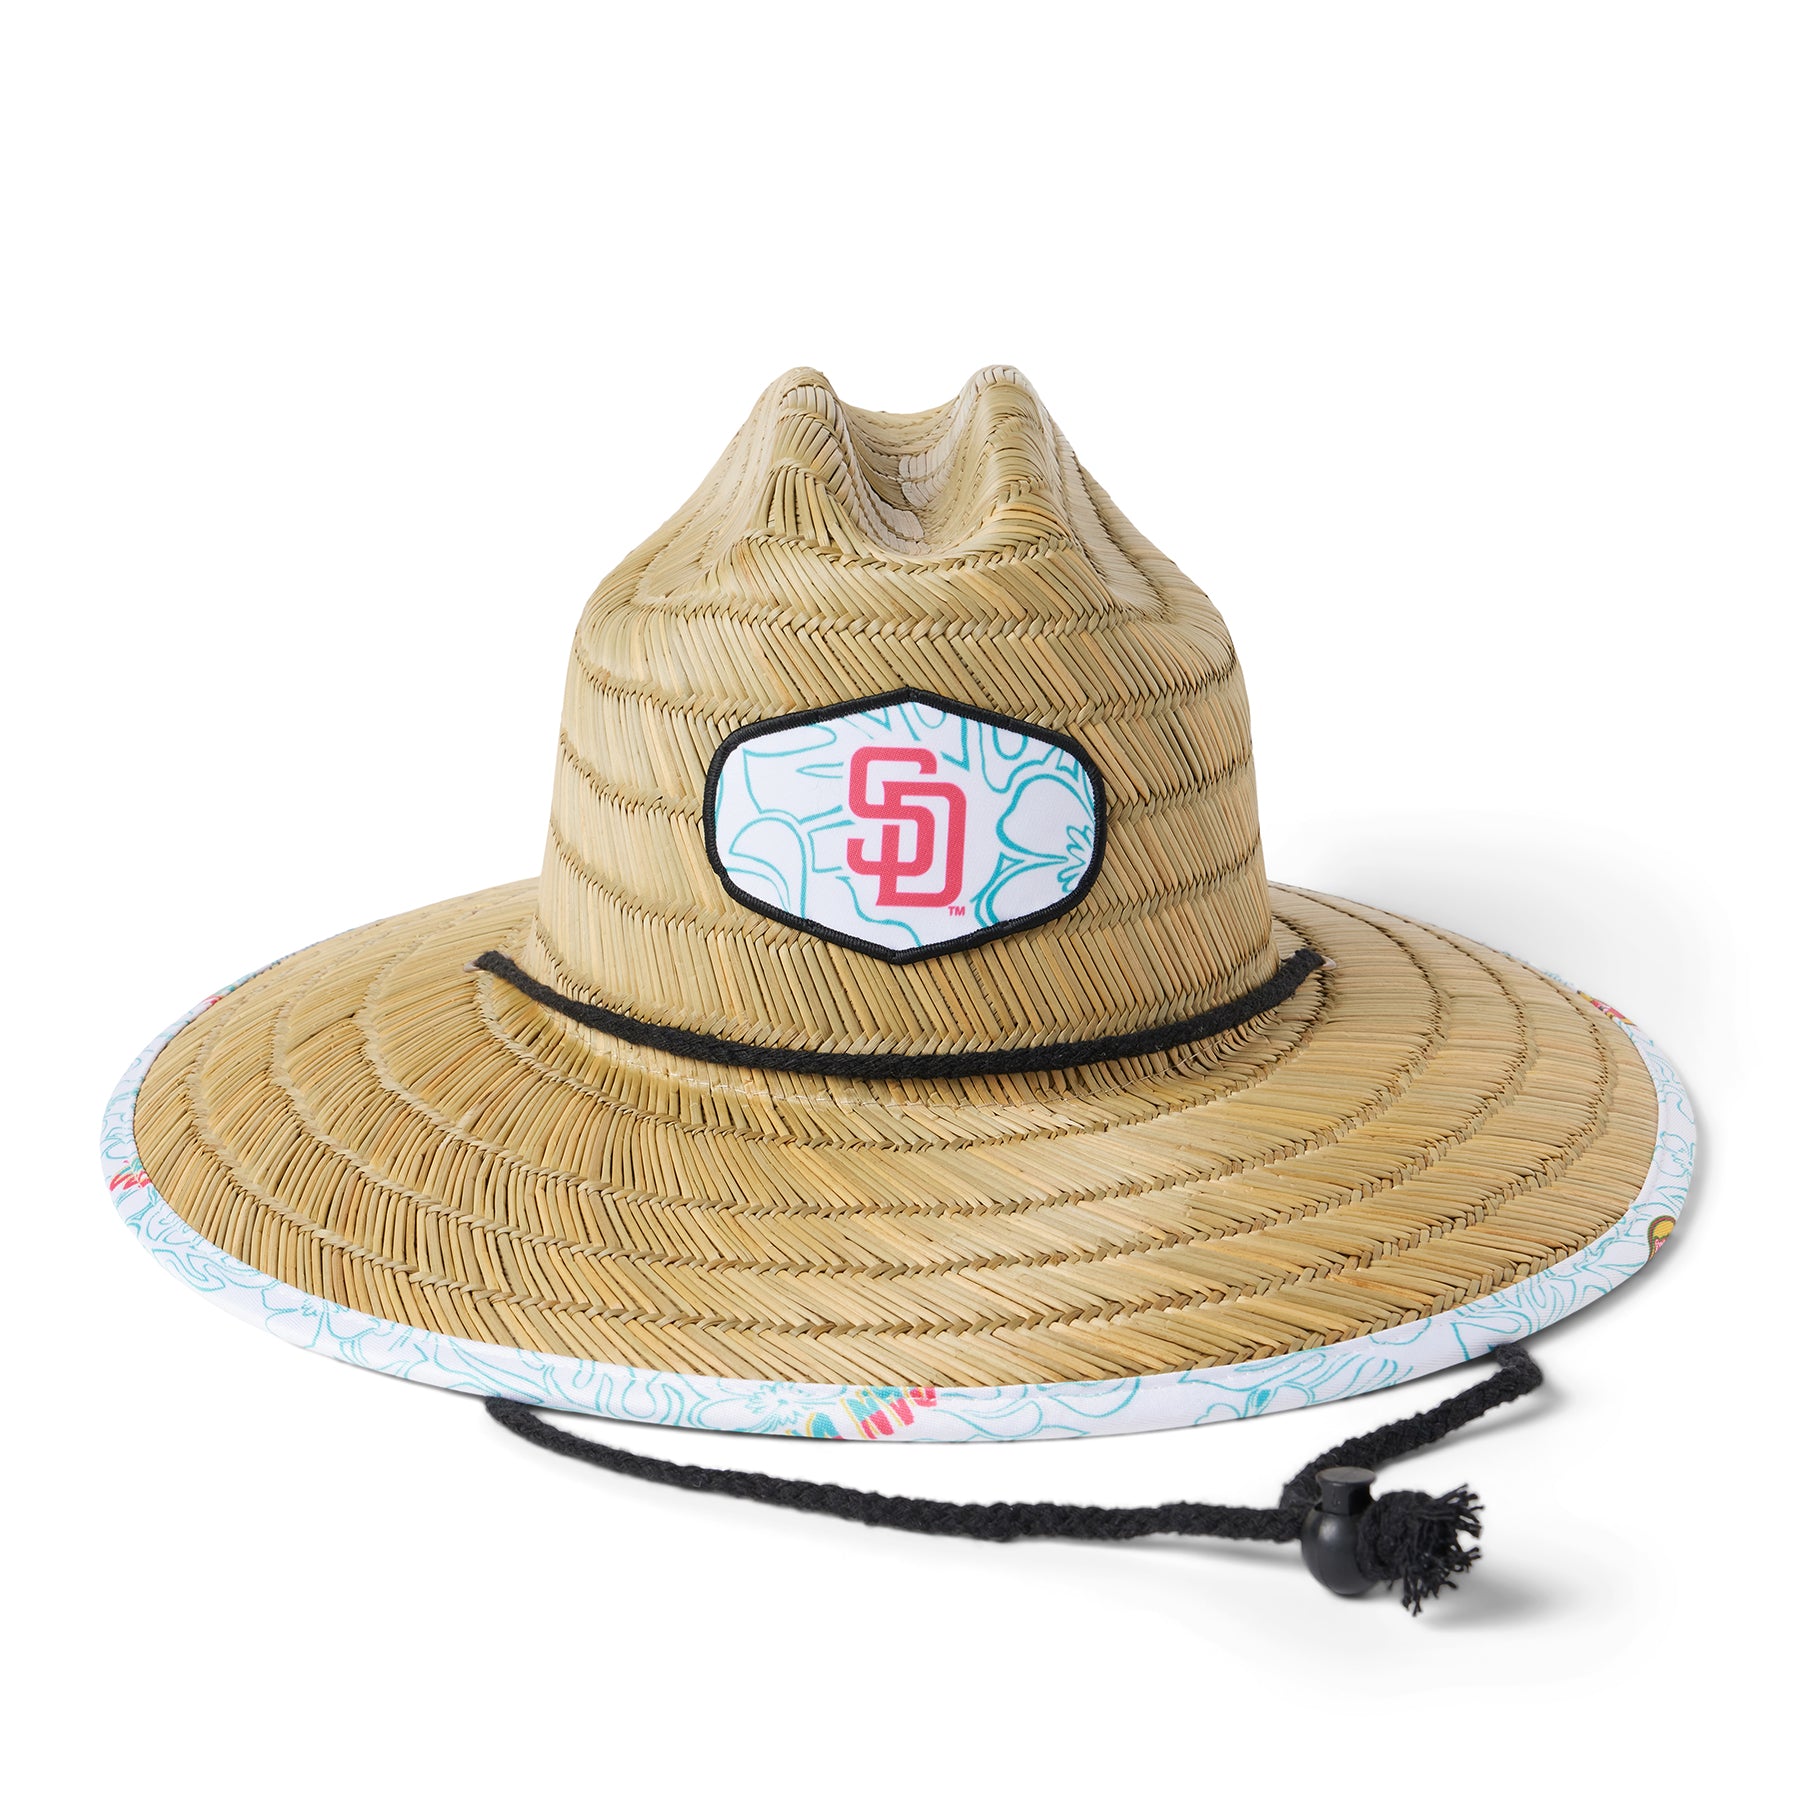 padres connect hat